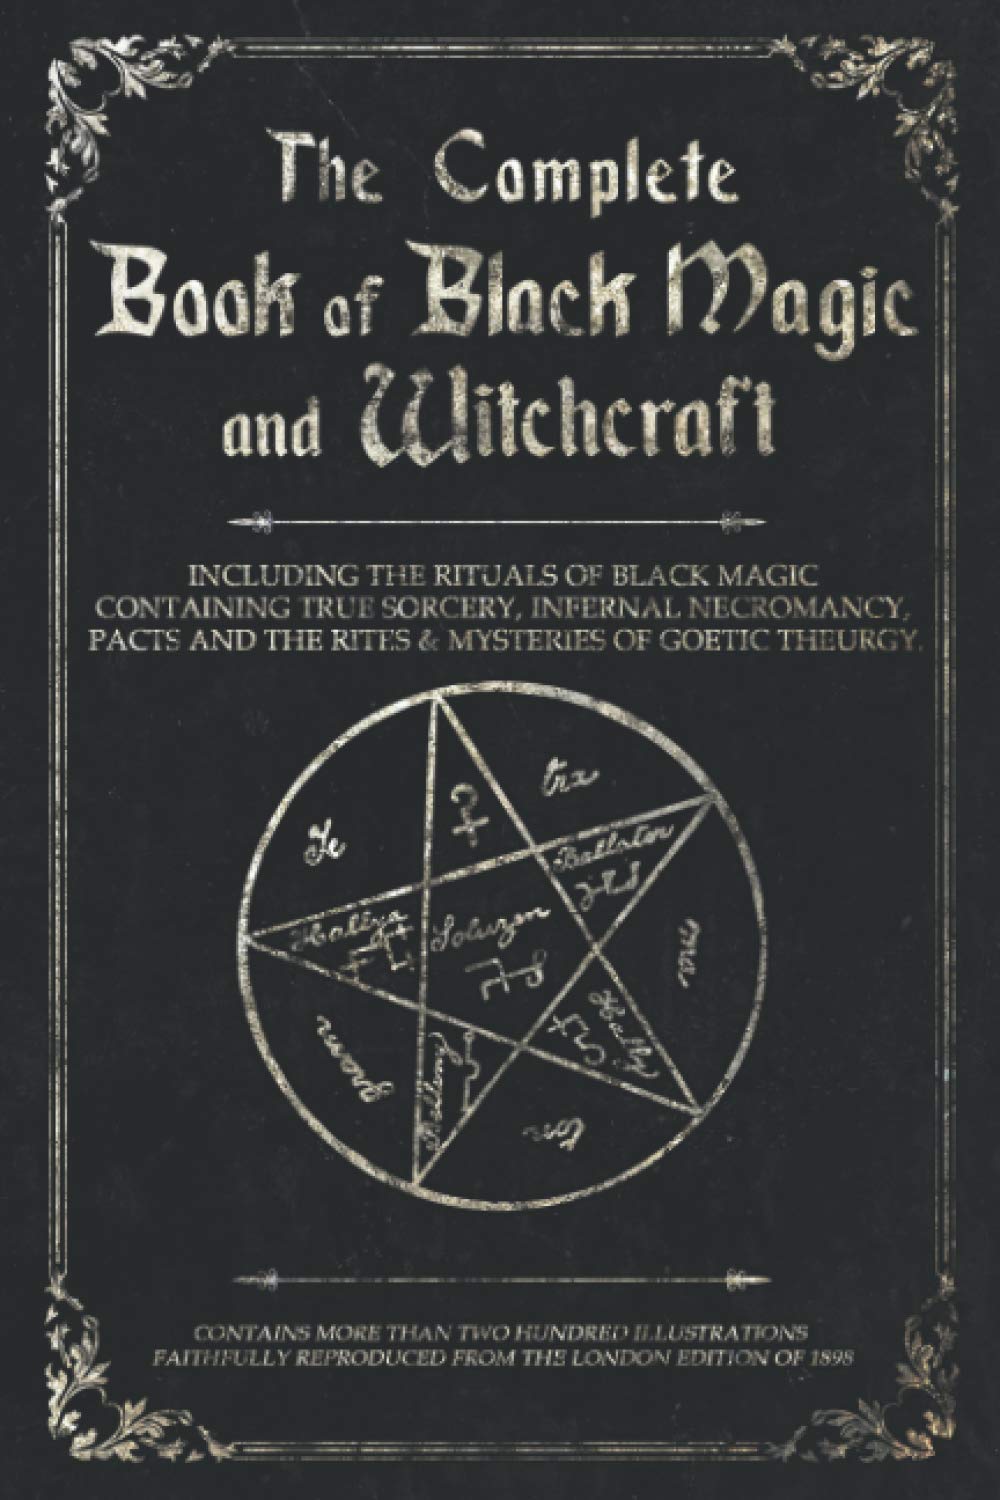 The Complete Book of Black Magic and Witchcraft